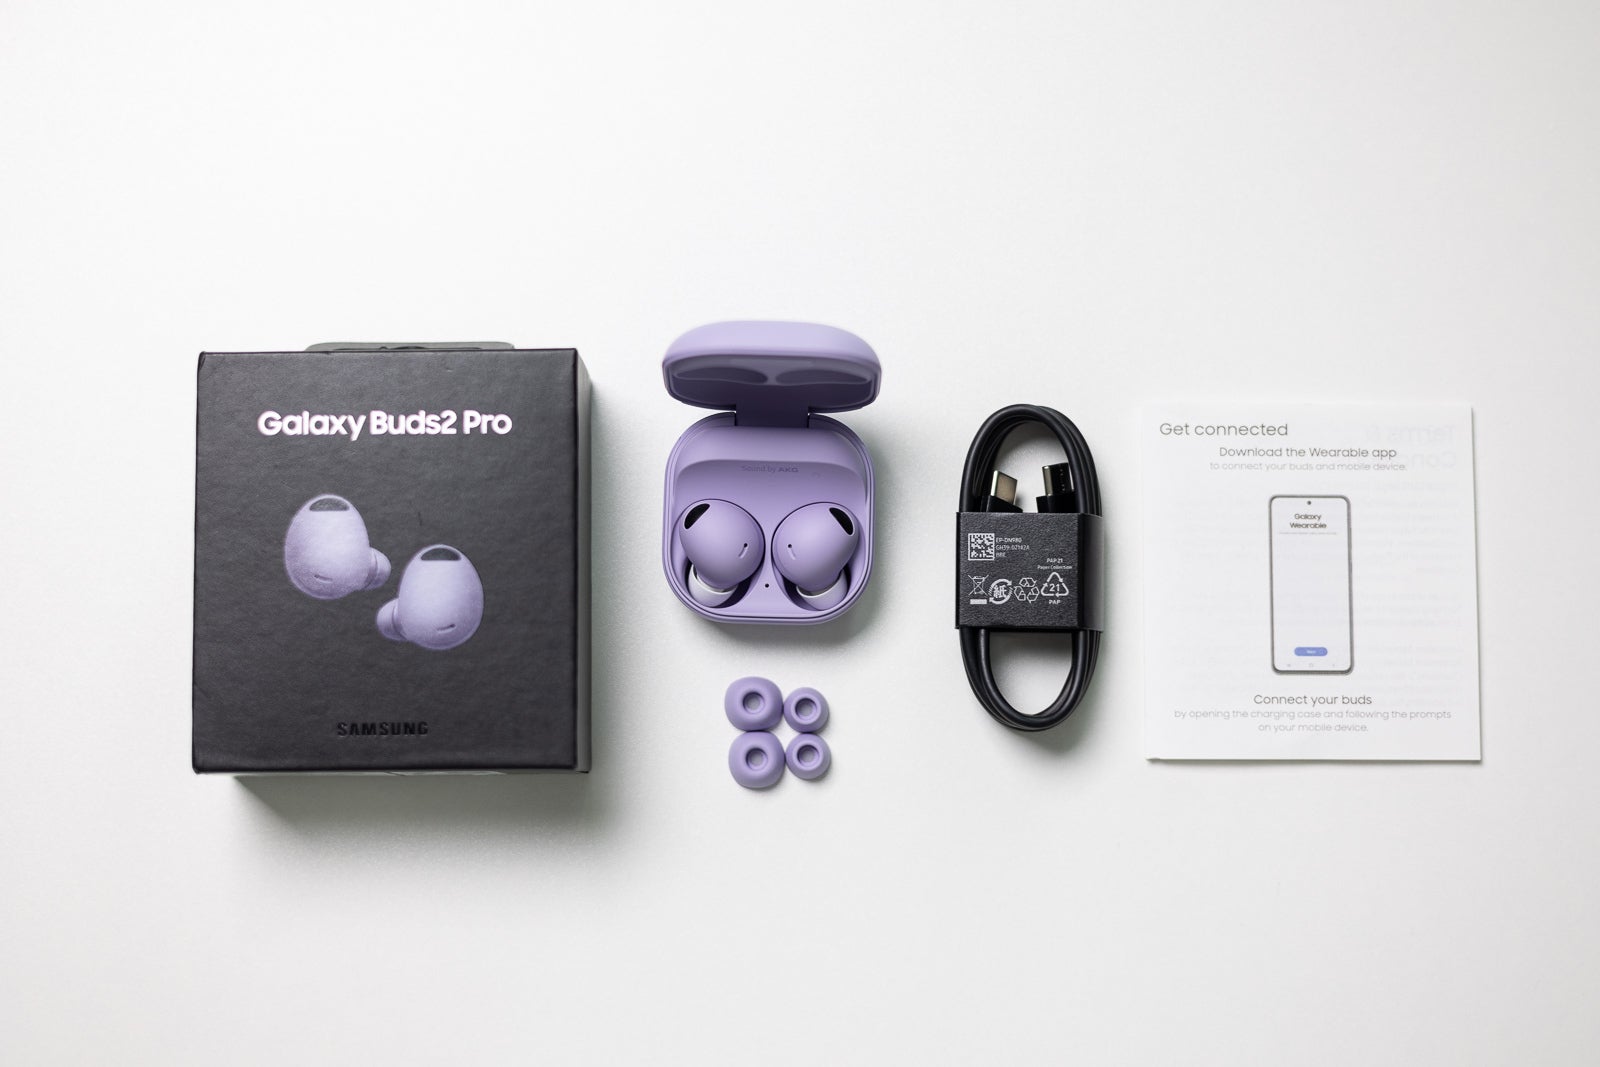 (Image credit - PhoneArena) Galaxy Buds 2 Pro, what's in the box - Galaxy Buds 2 Pro review: Sleeker design, but is it worth the price jump?